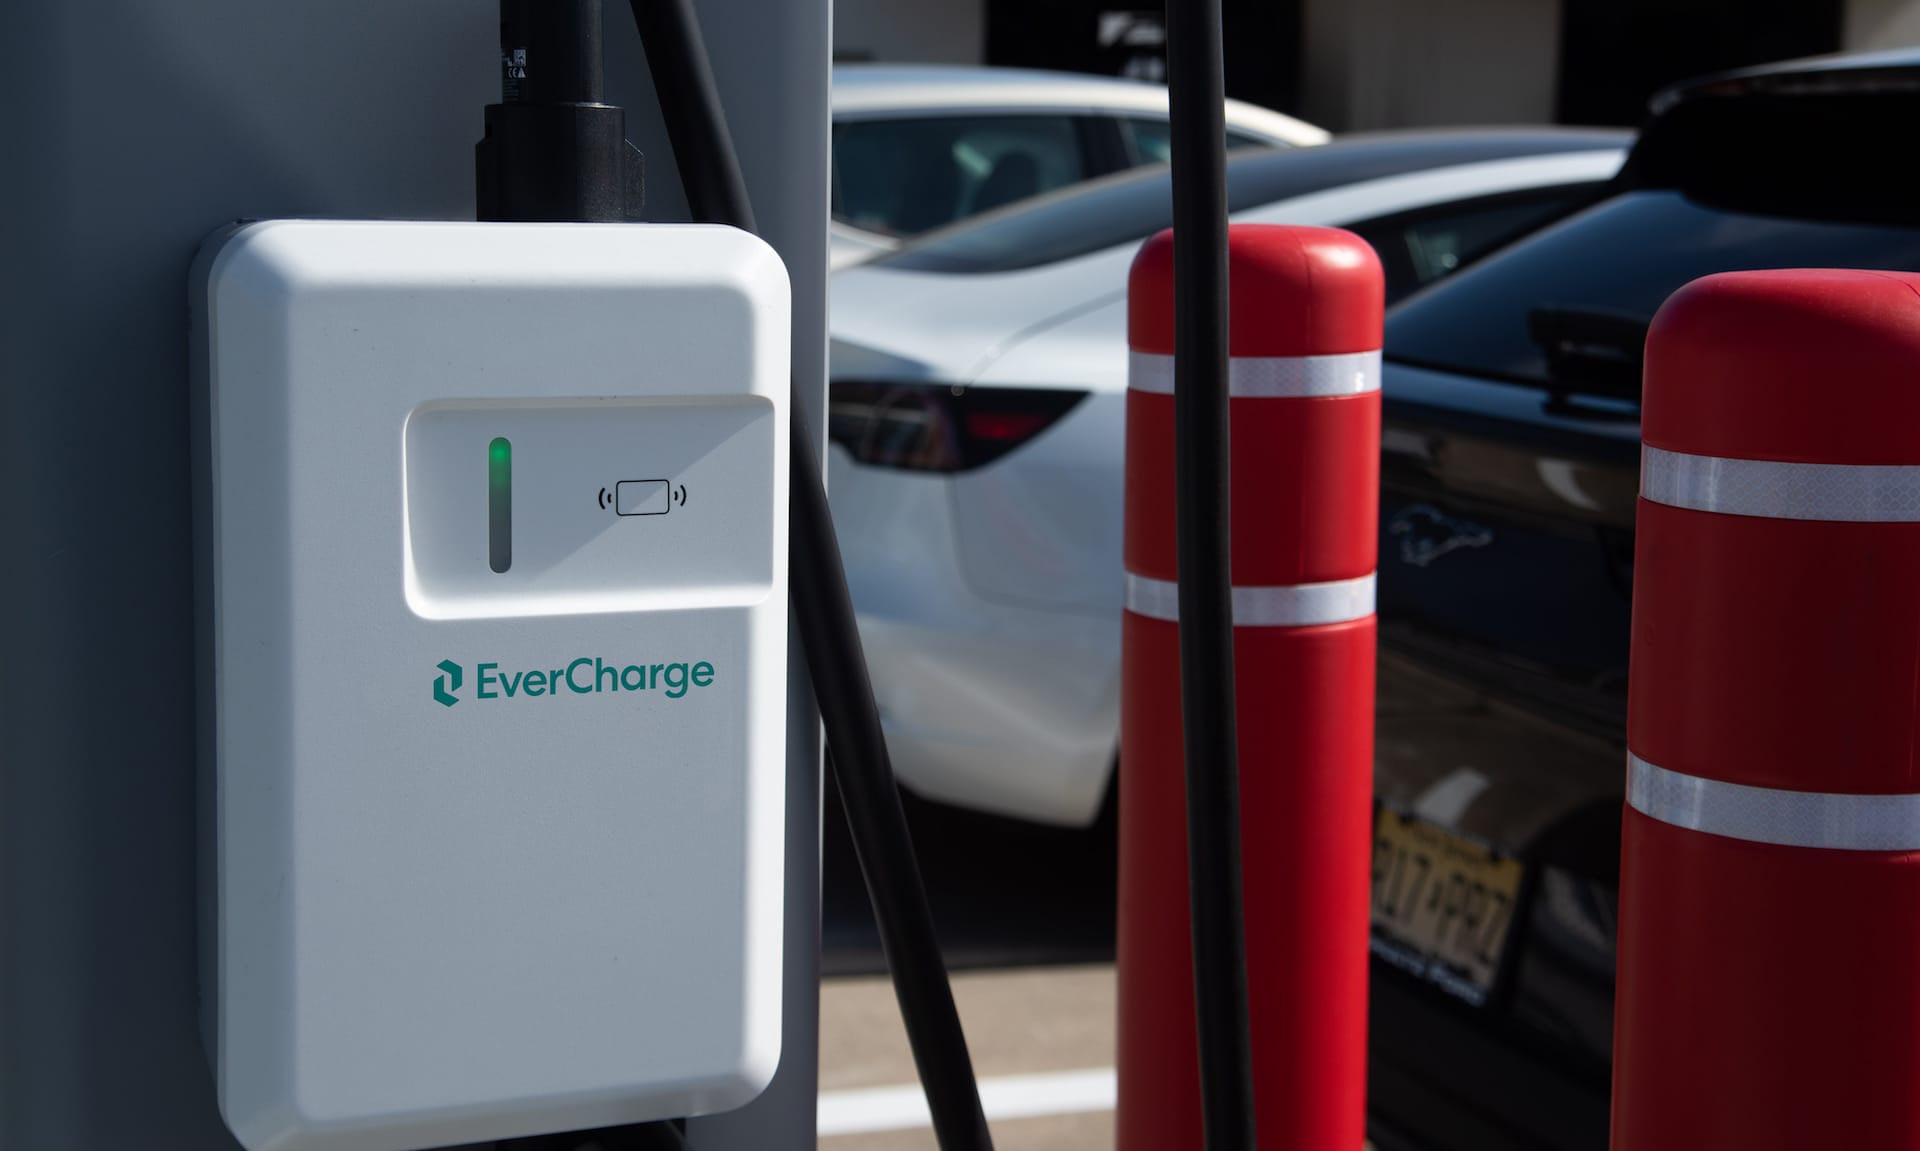 Avis Budget Group and EverCharge Partner to Launch Large-Scale EV Charging Stations at Houston Airport